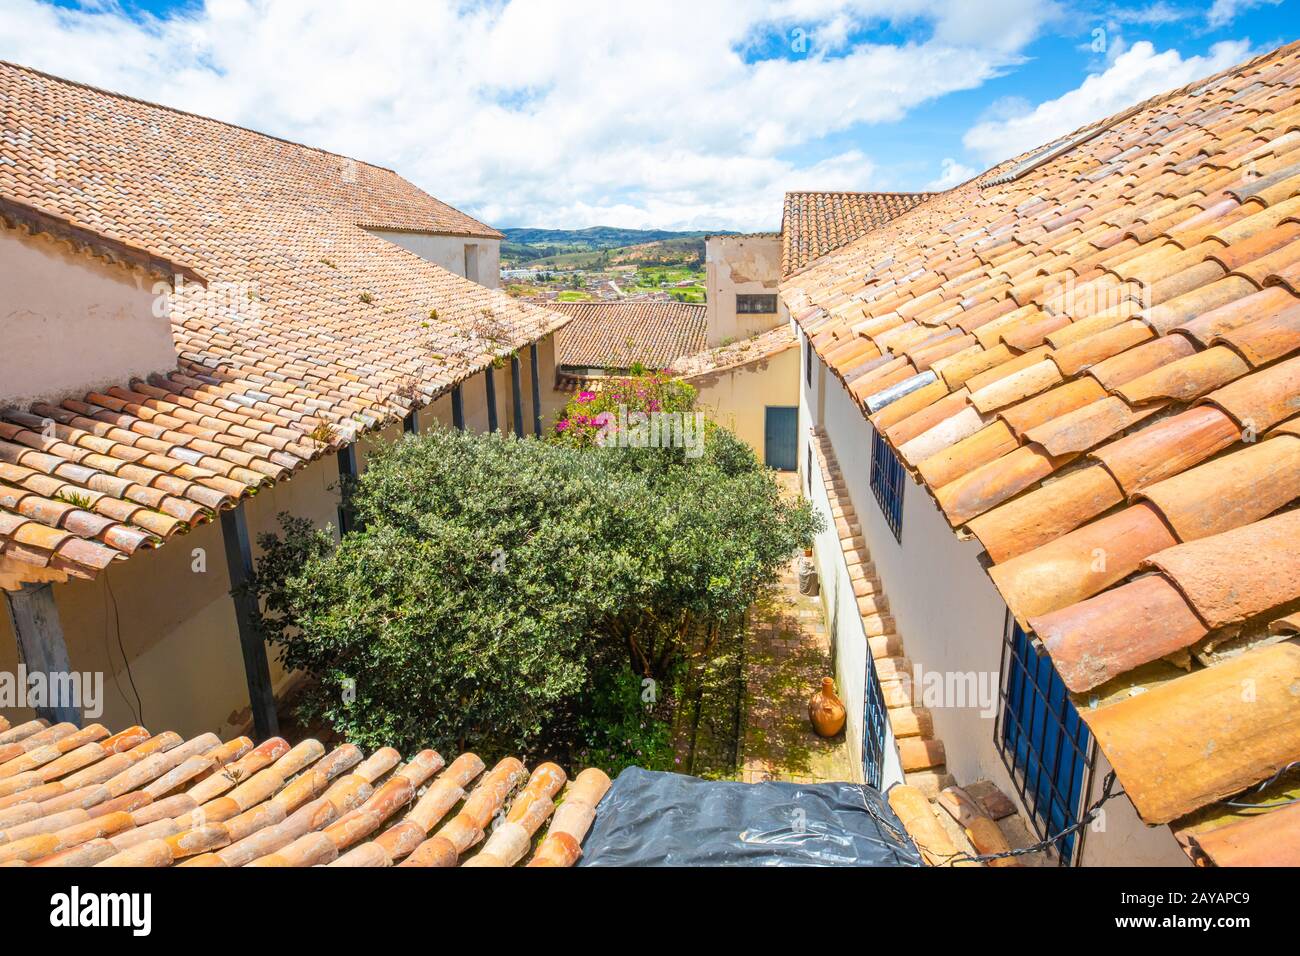 Tunja roofs of colonial houses Stock Photo